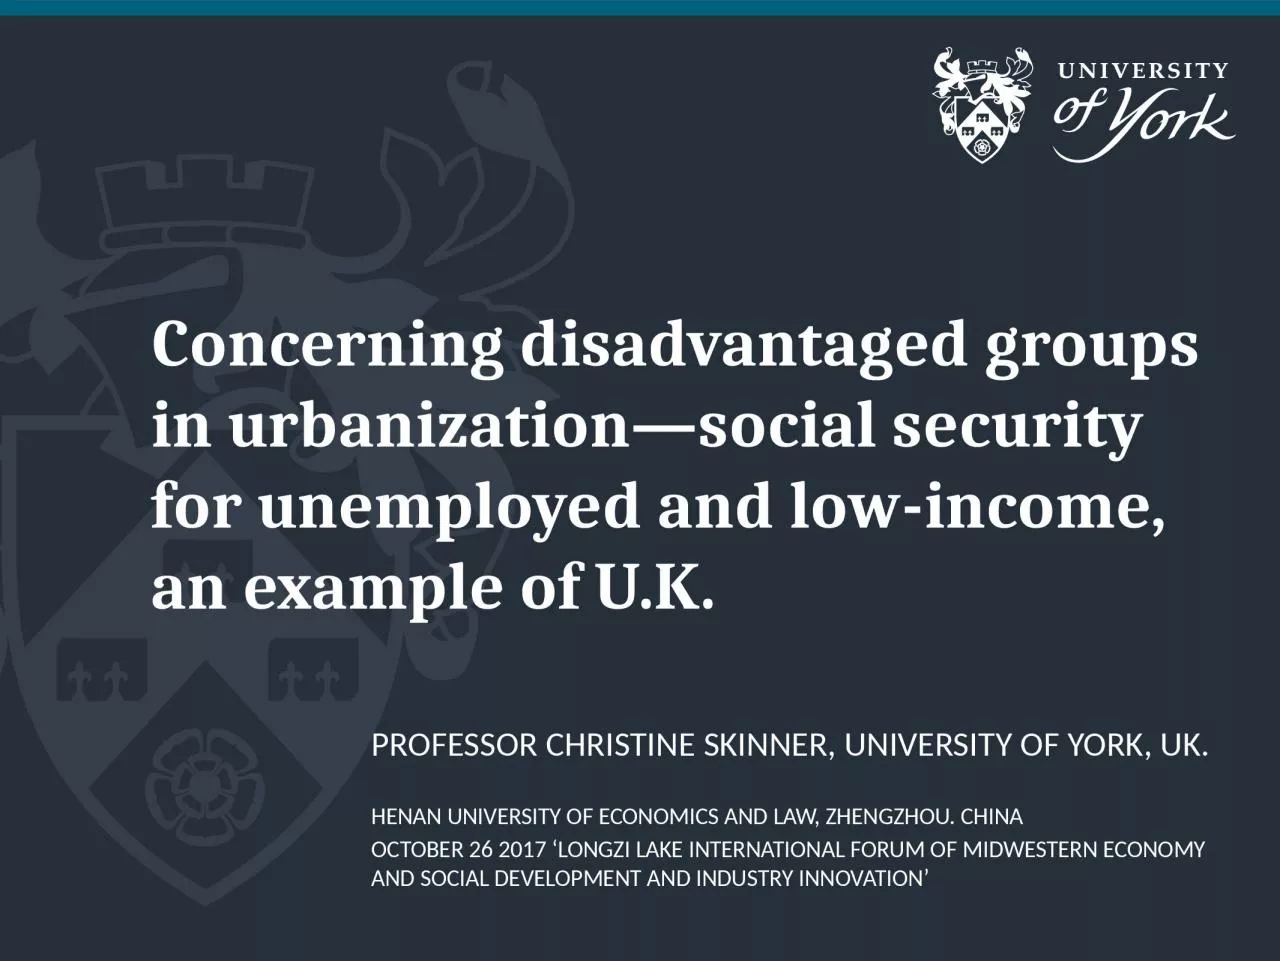 Concerning disadvantaged groups in urbanization—social security for unemployed and low-income,